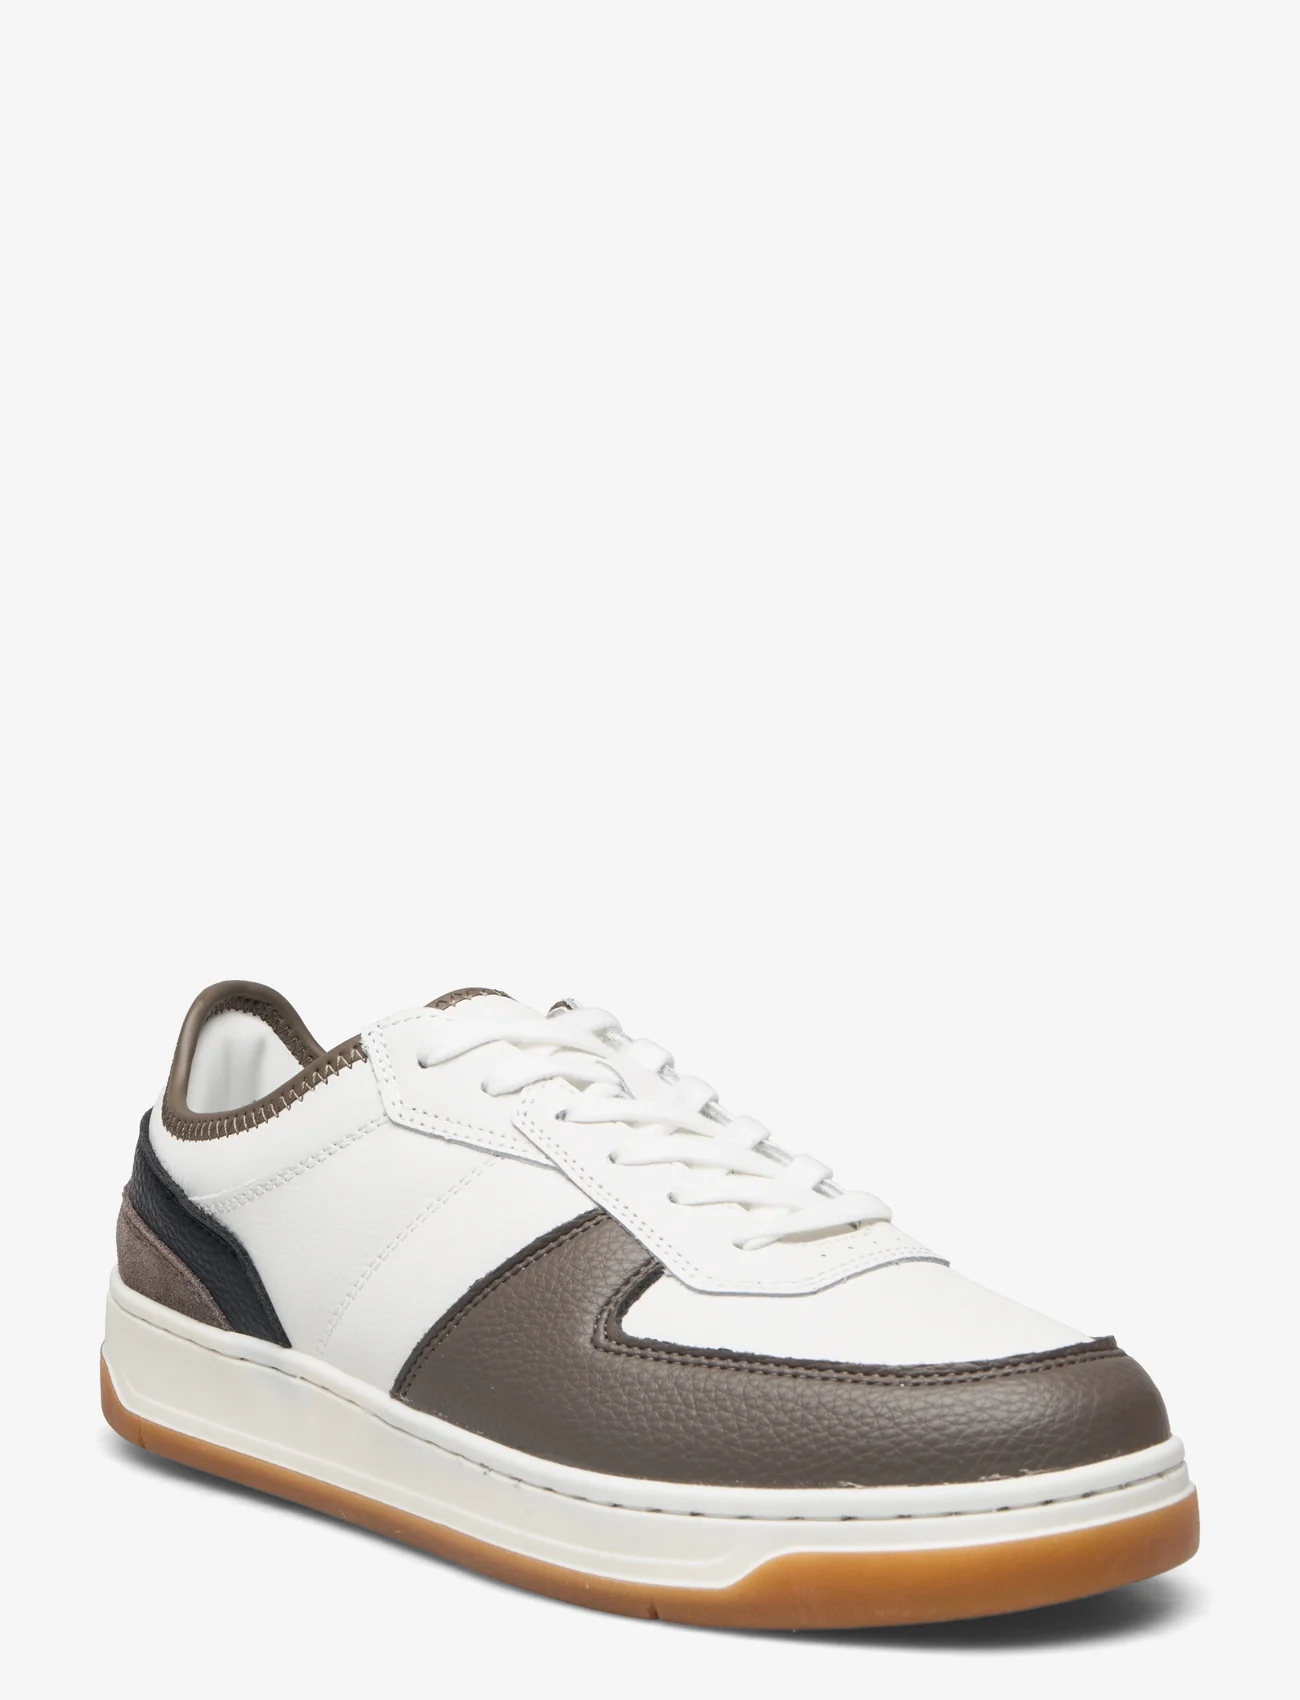 Mango - Combined leather trainers - lave sneakers - grey - 0